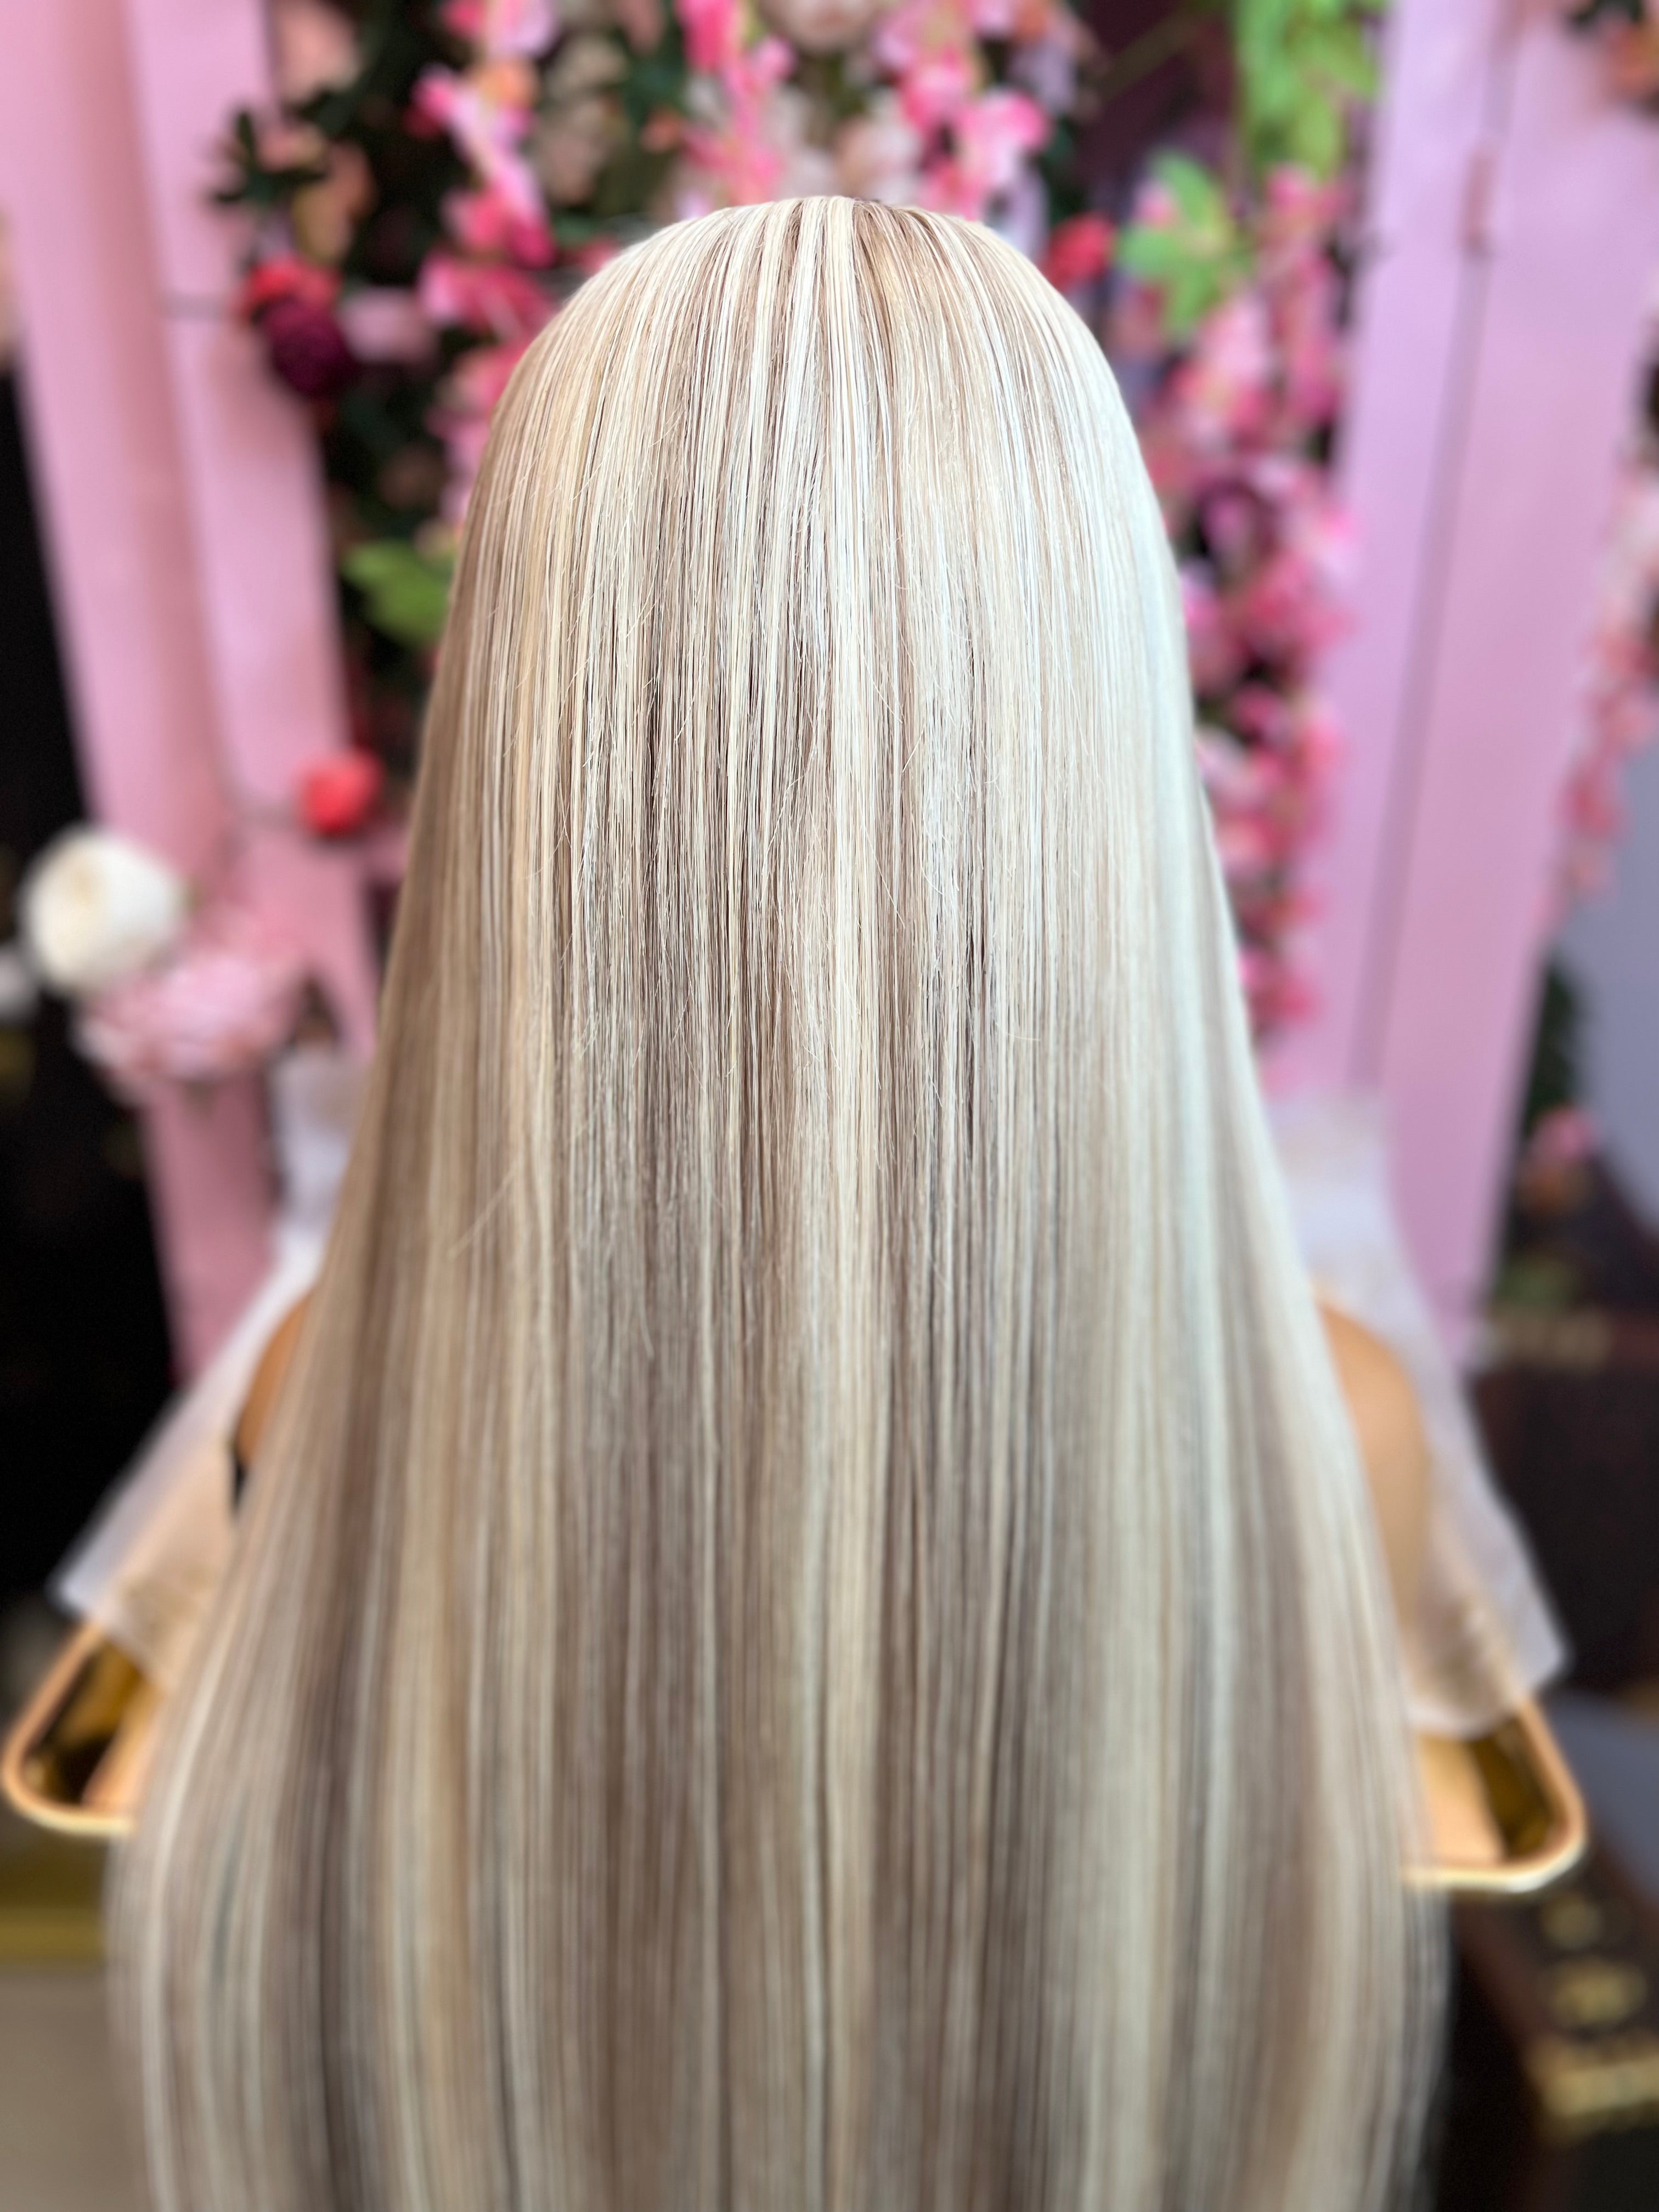 30+" ASH BLONDE HIGHLIGHT 13X6 FRONTAL WIG